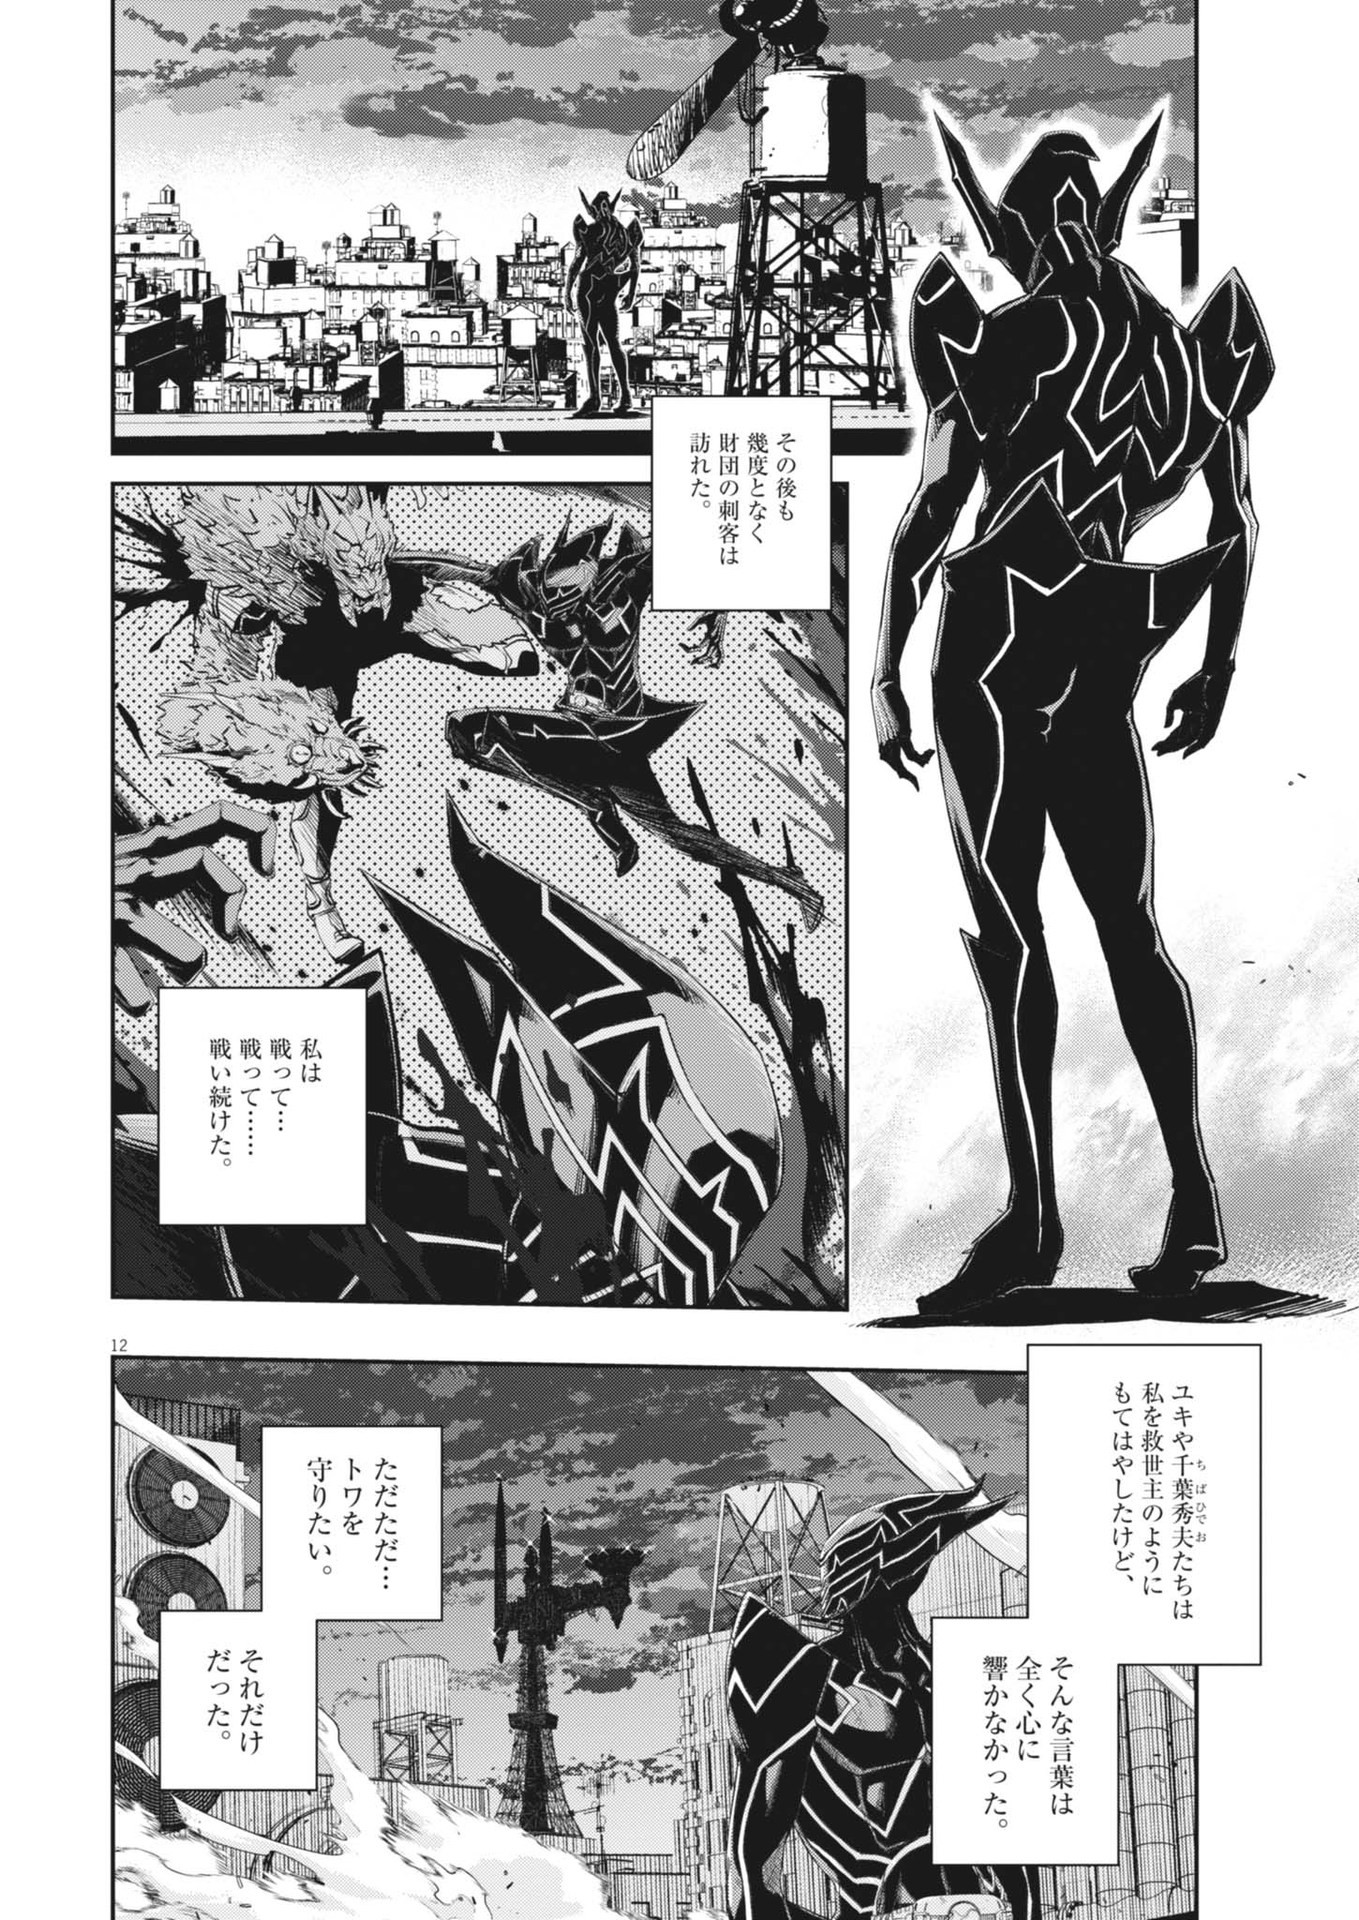 Kamen Rider W: Fuuto Tantei - Chapter 149 - Page 12